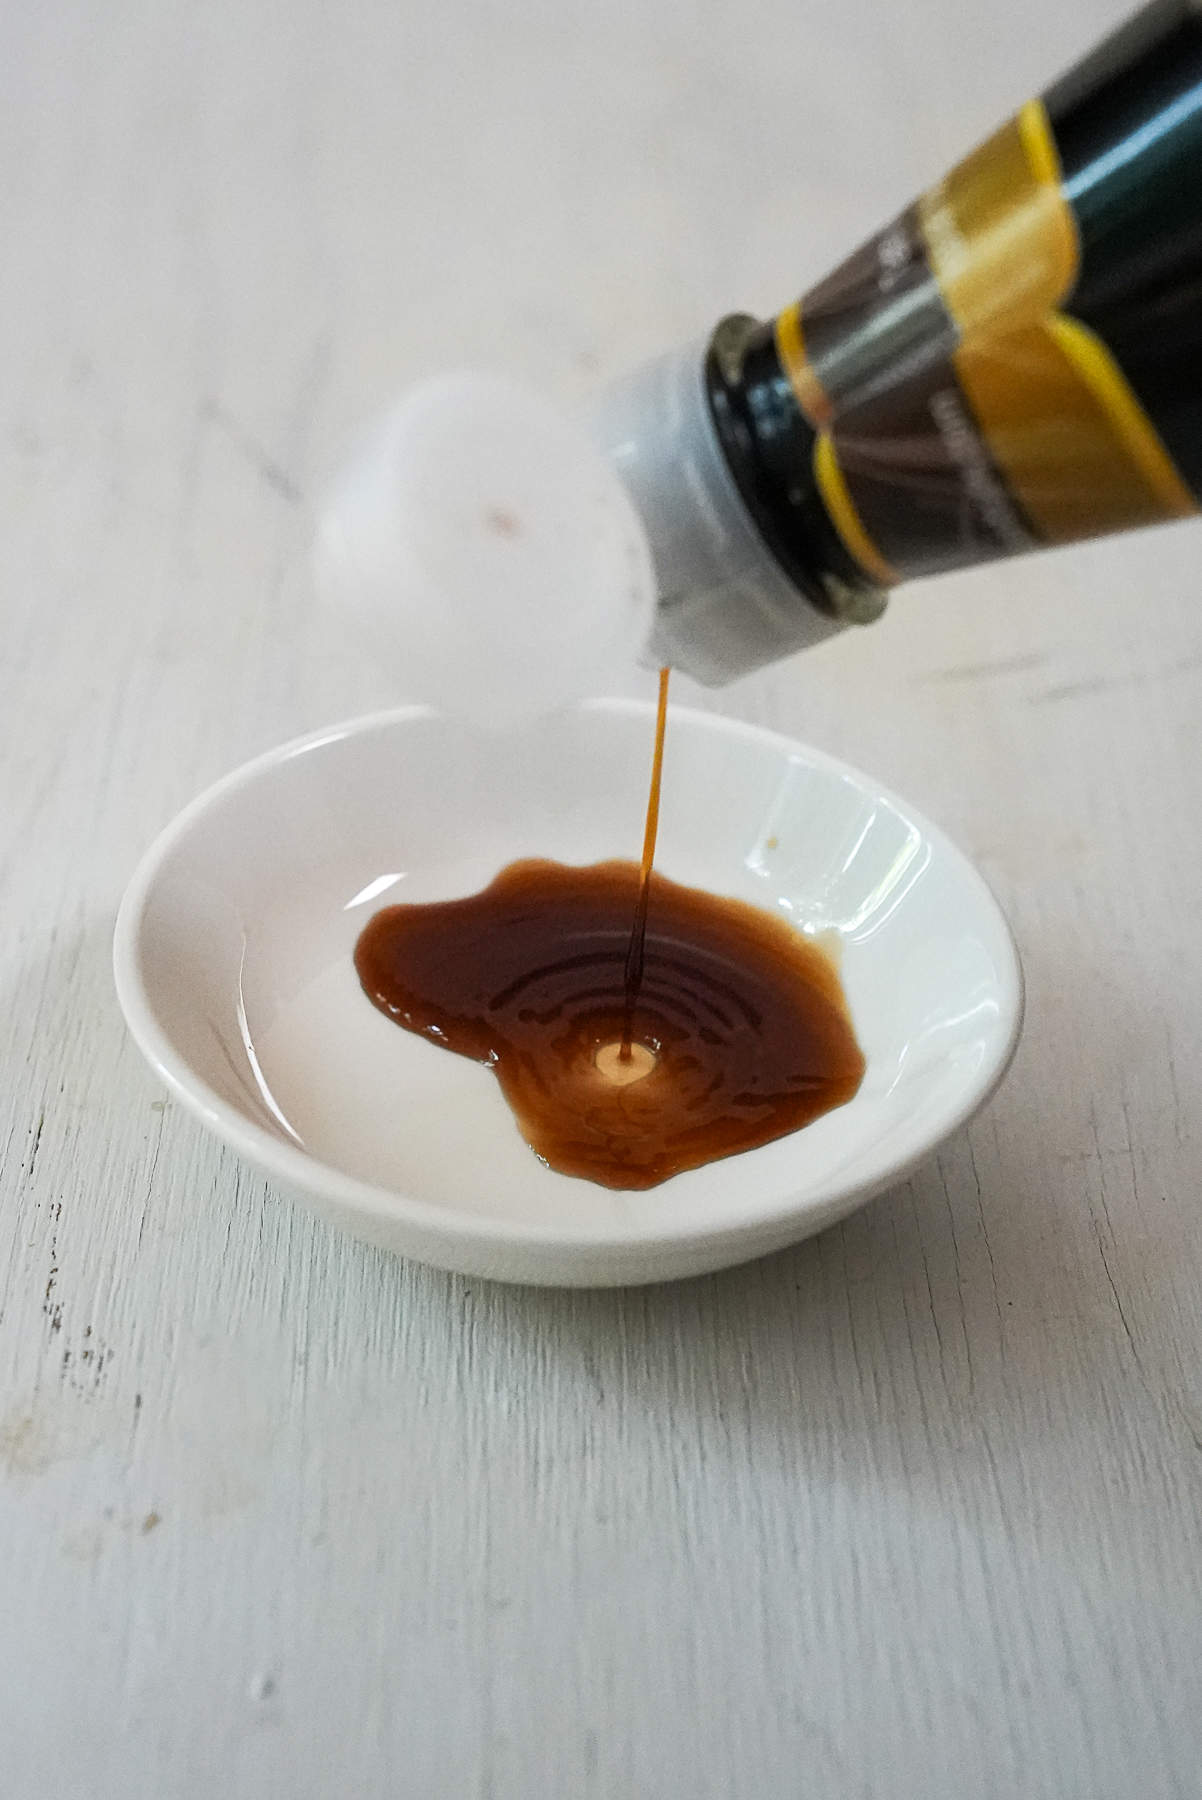 Pouring Soy Sauce